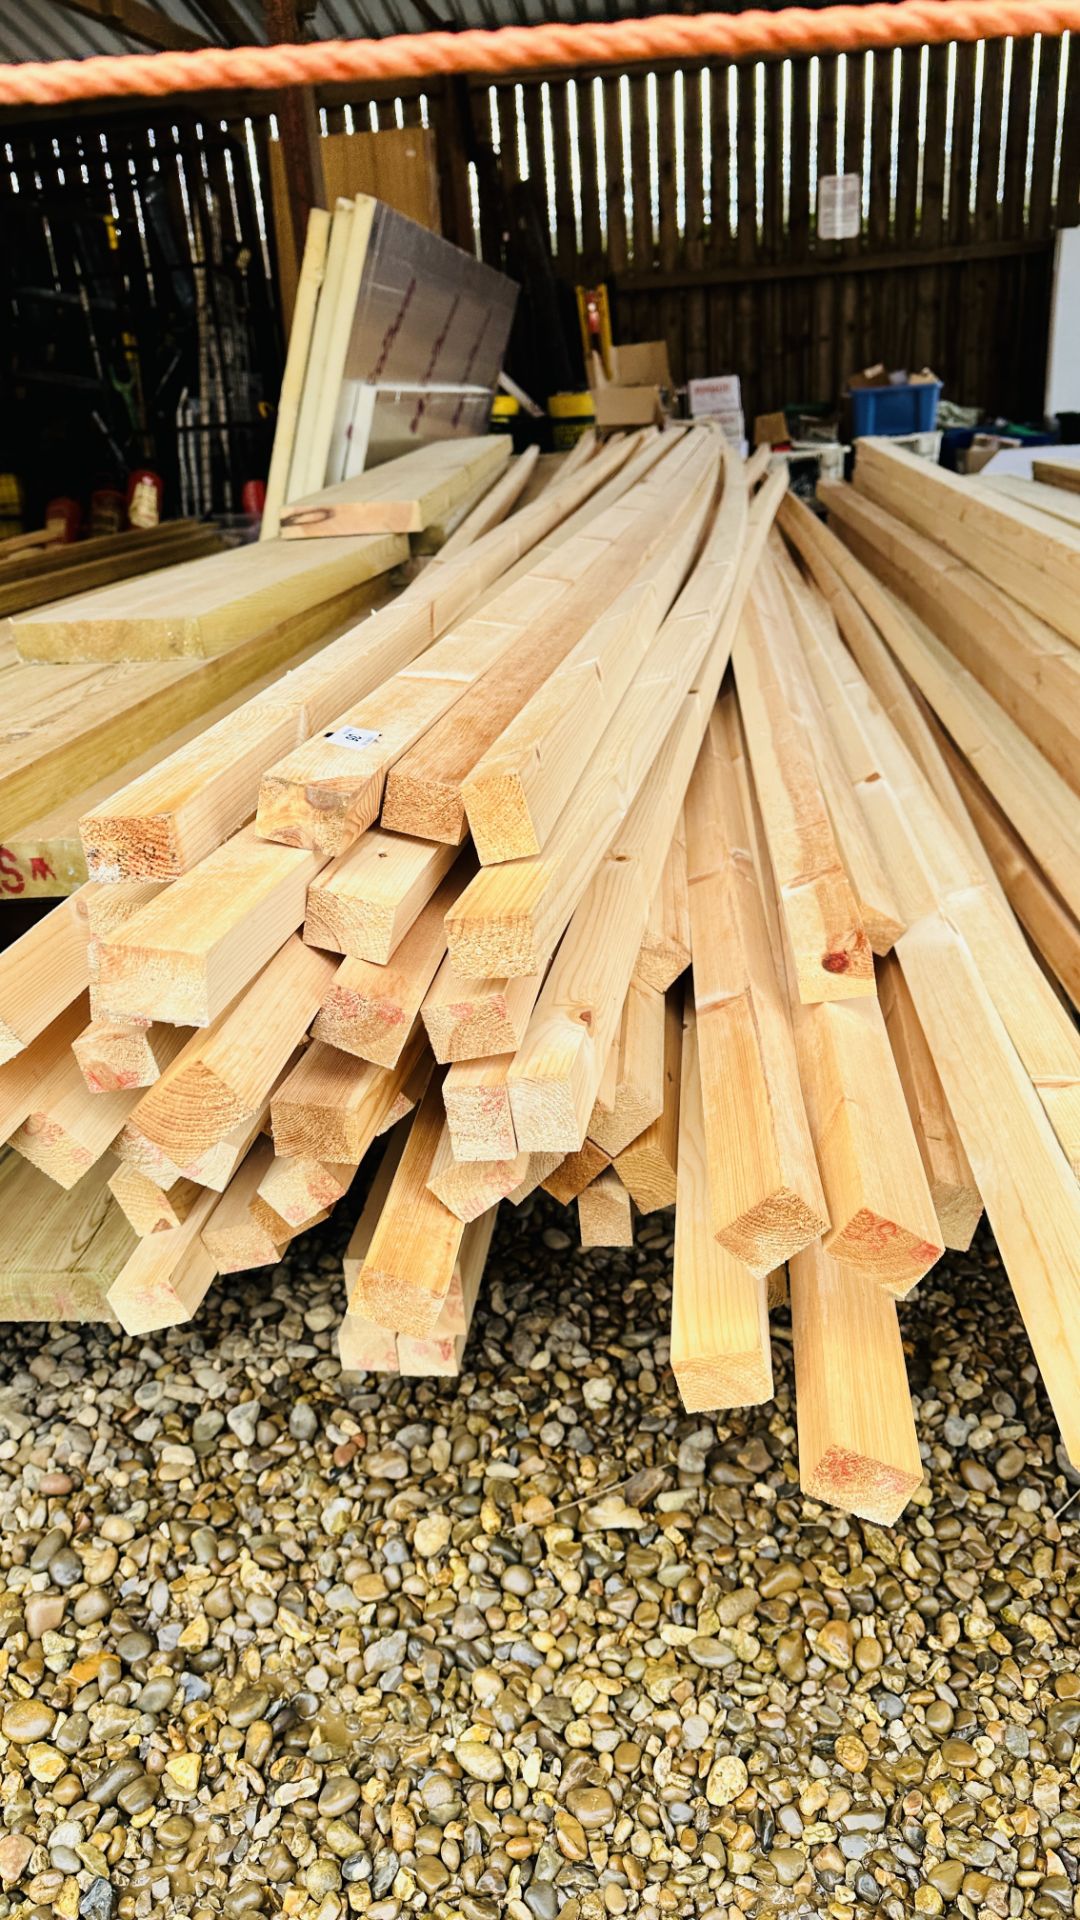 APPROX 140 LENGTHS OF 45MM X 35MM PLANED TIMBER, MINIMUM LENGTHS APPROX 4M, MAXIMUM LENGTH APPROX 5.